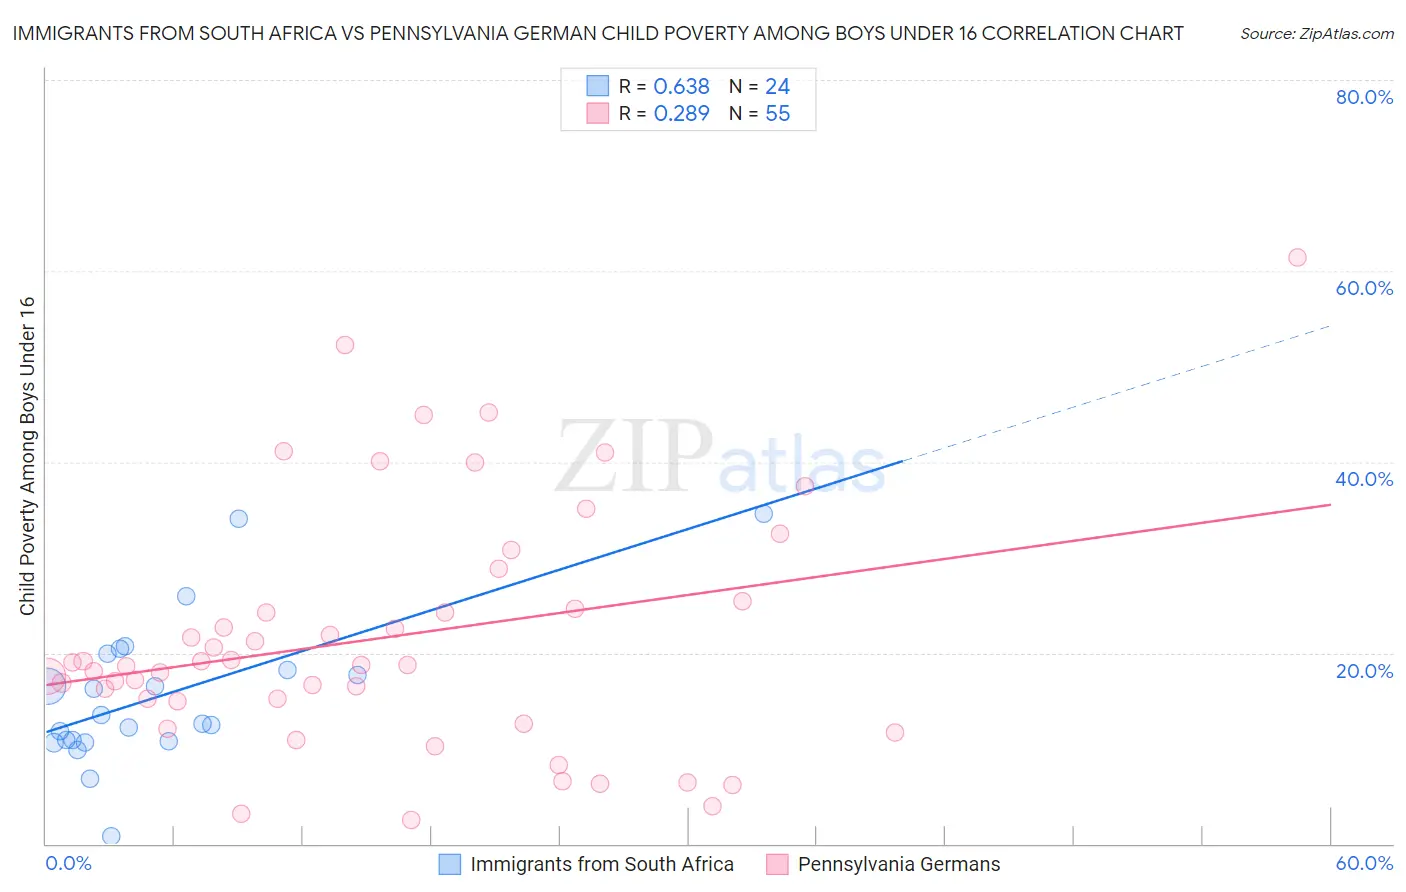 Immigrants from South Africa vs Pennsylvania German Child Poverty Among Boys Under 16